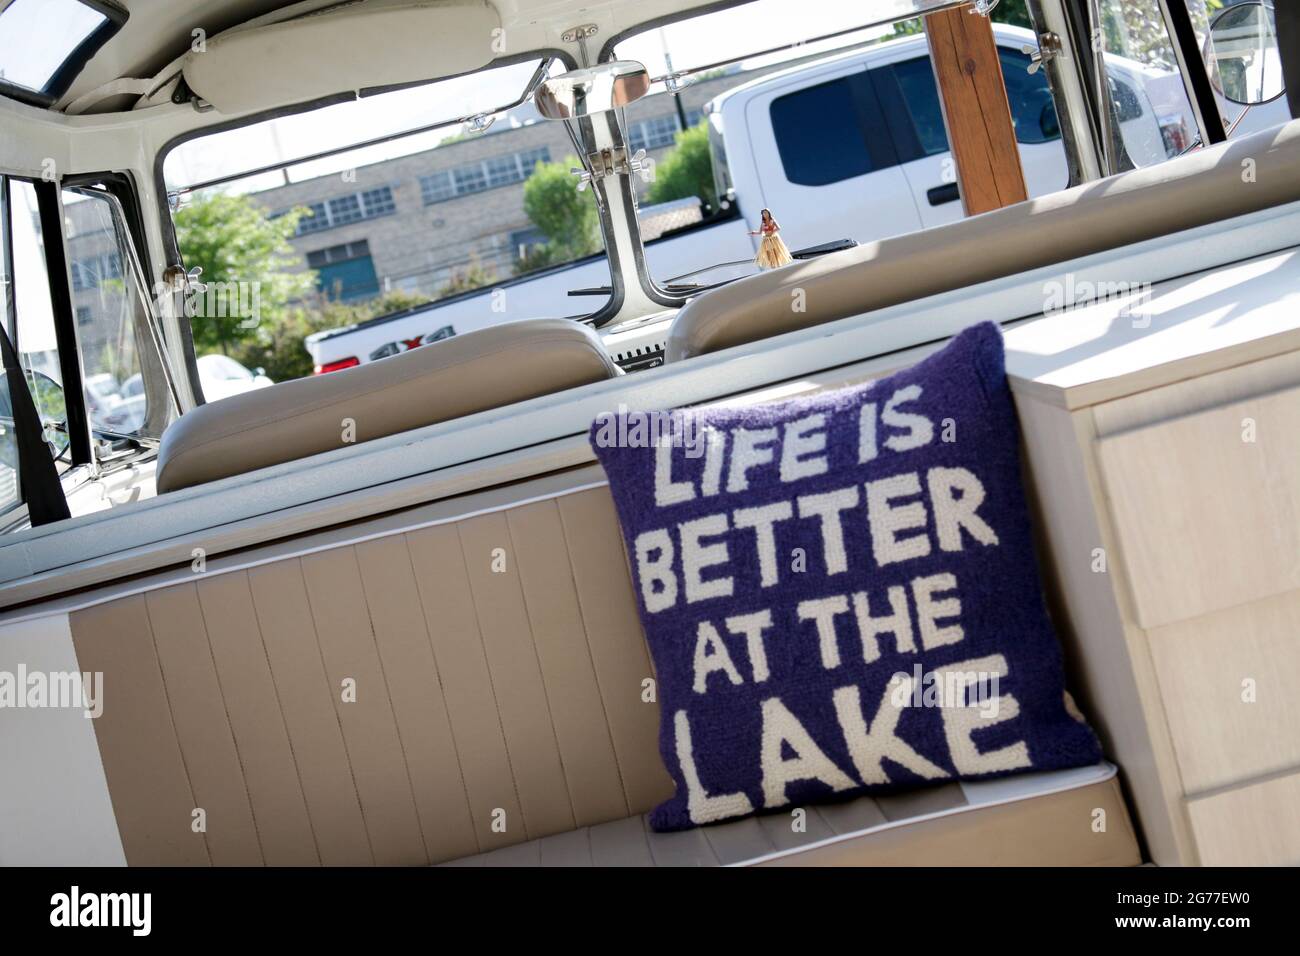 Life Is Better At The Lake pillow inside VW Bus Stock Photo